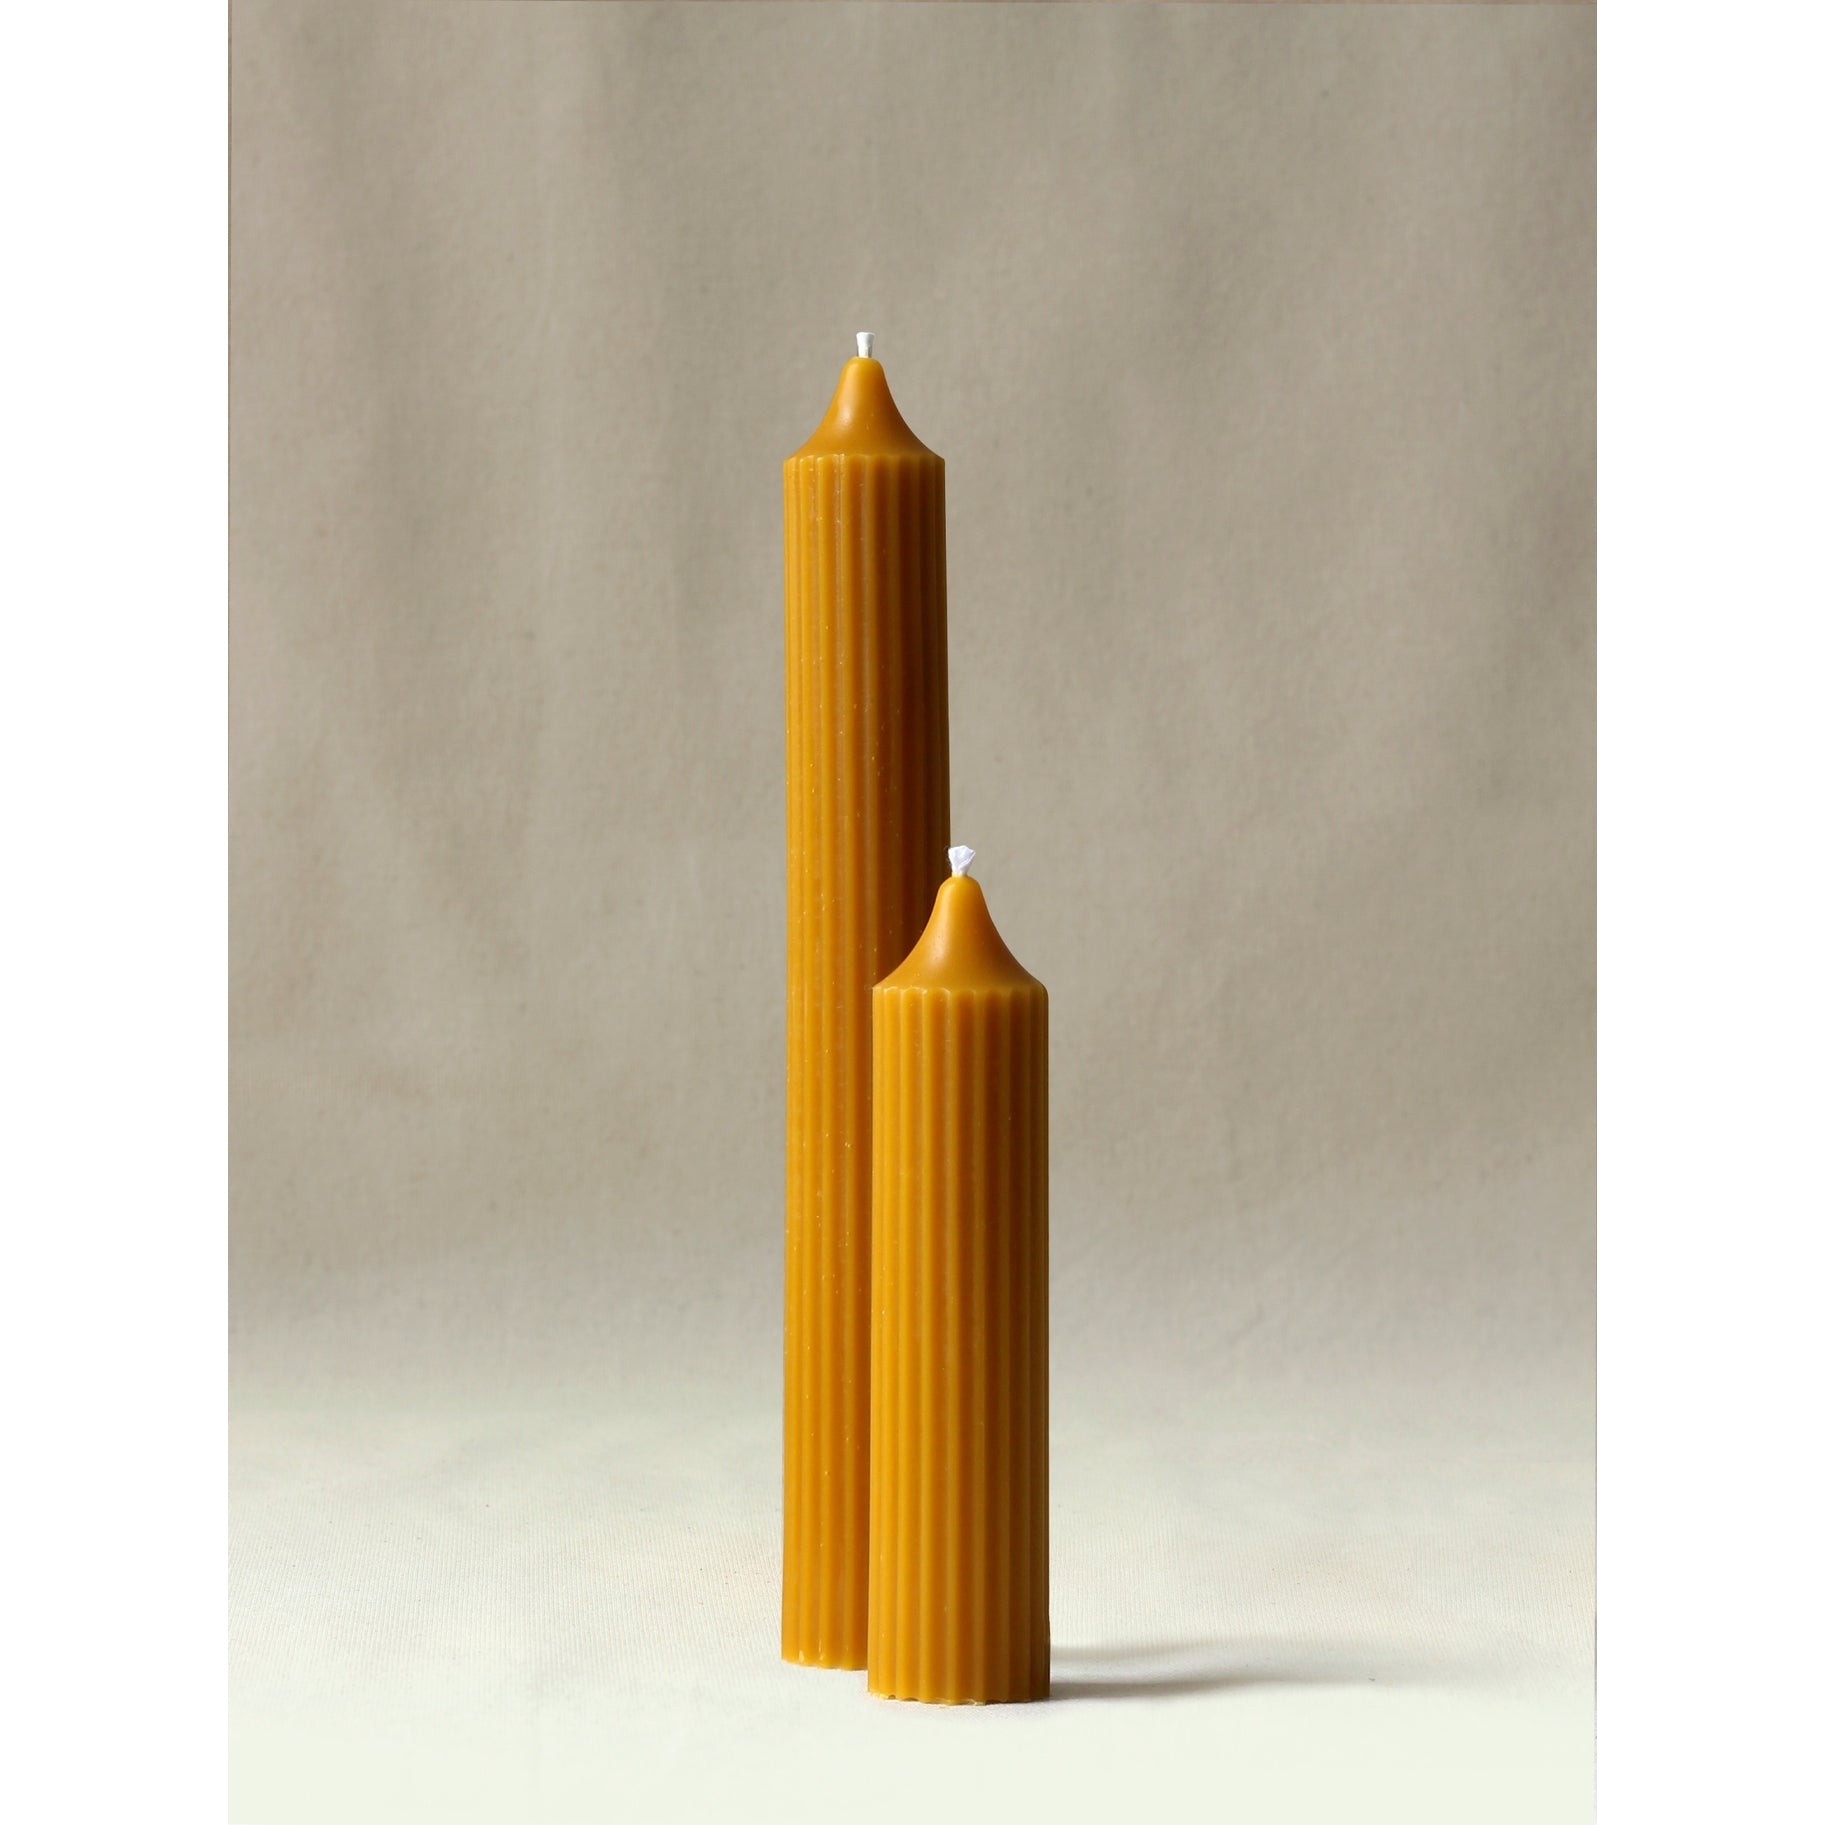 Basic Ones - Organic Beeswax Candles